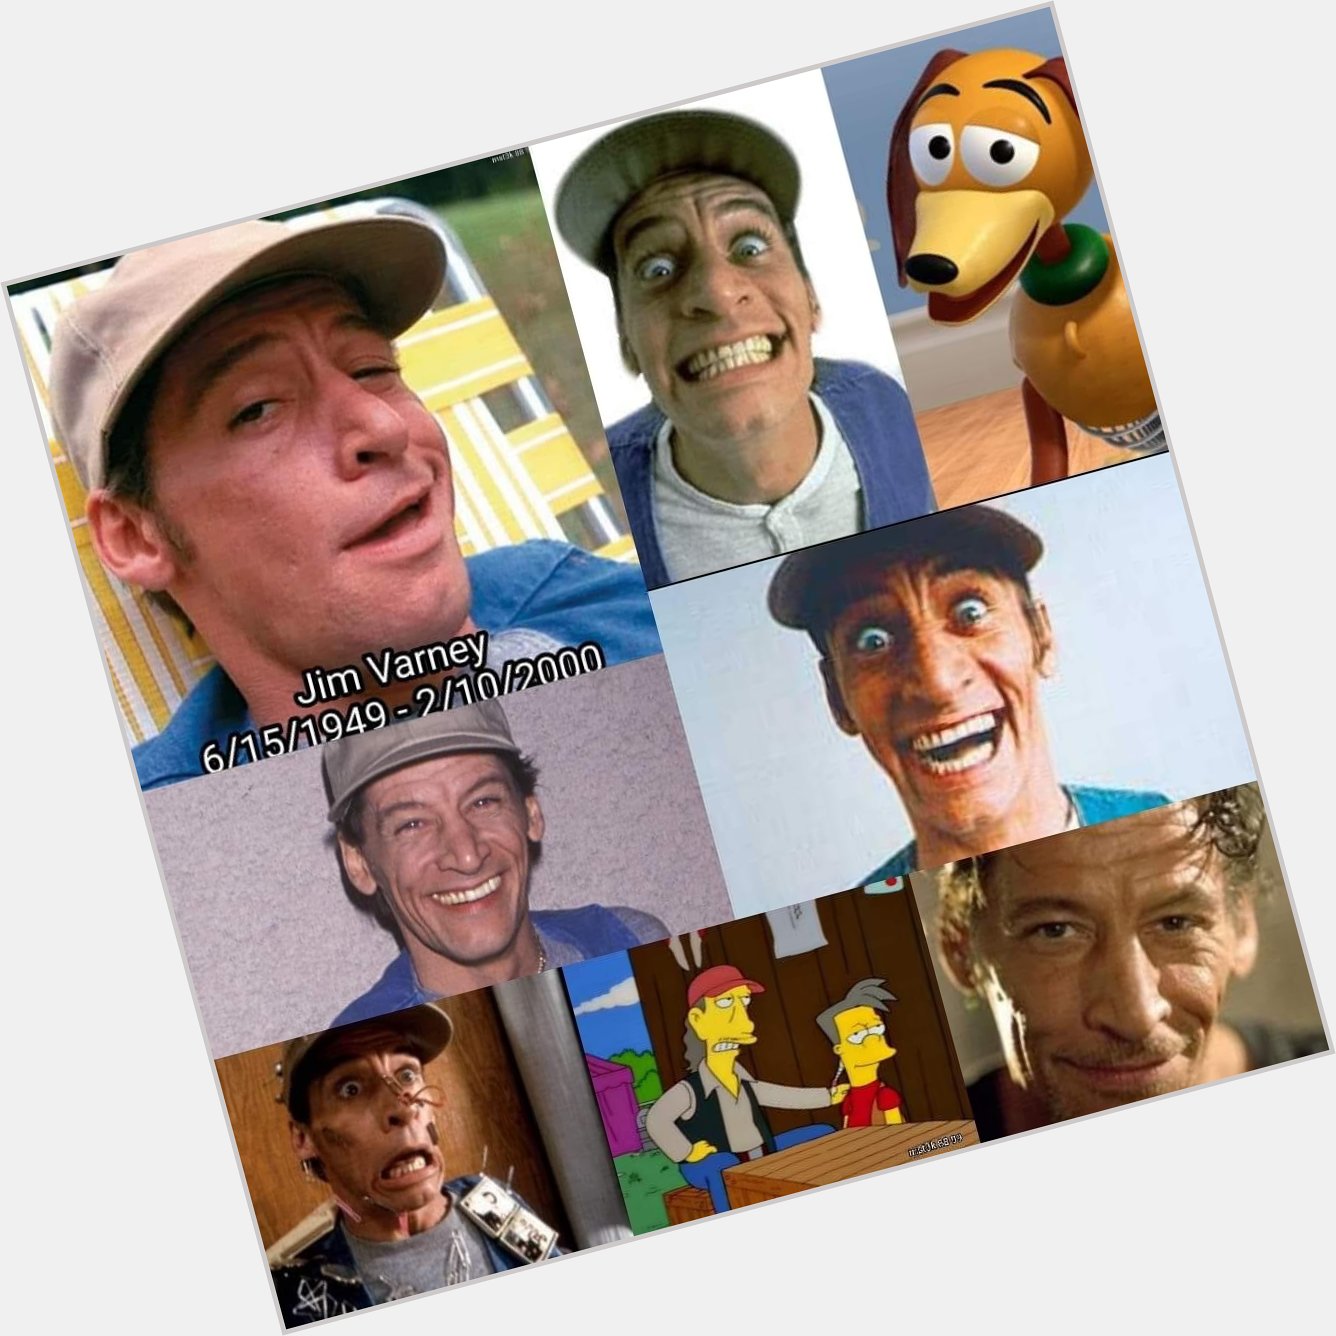 Happy Jim Varney s Birthday to all* who celebrate!

*its  I m talking about 